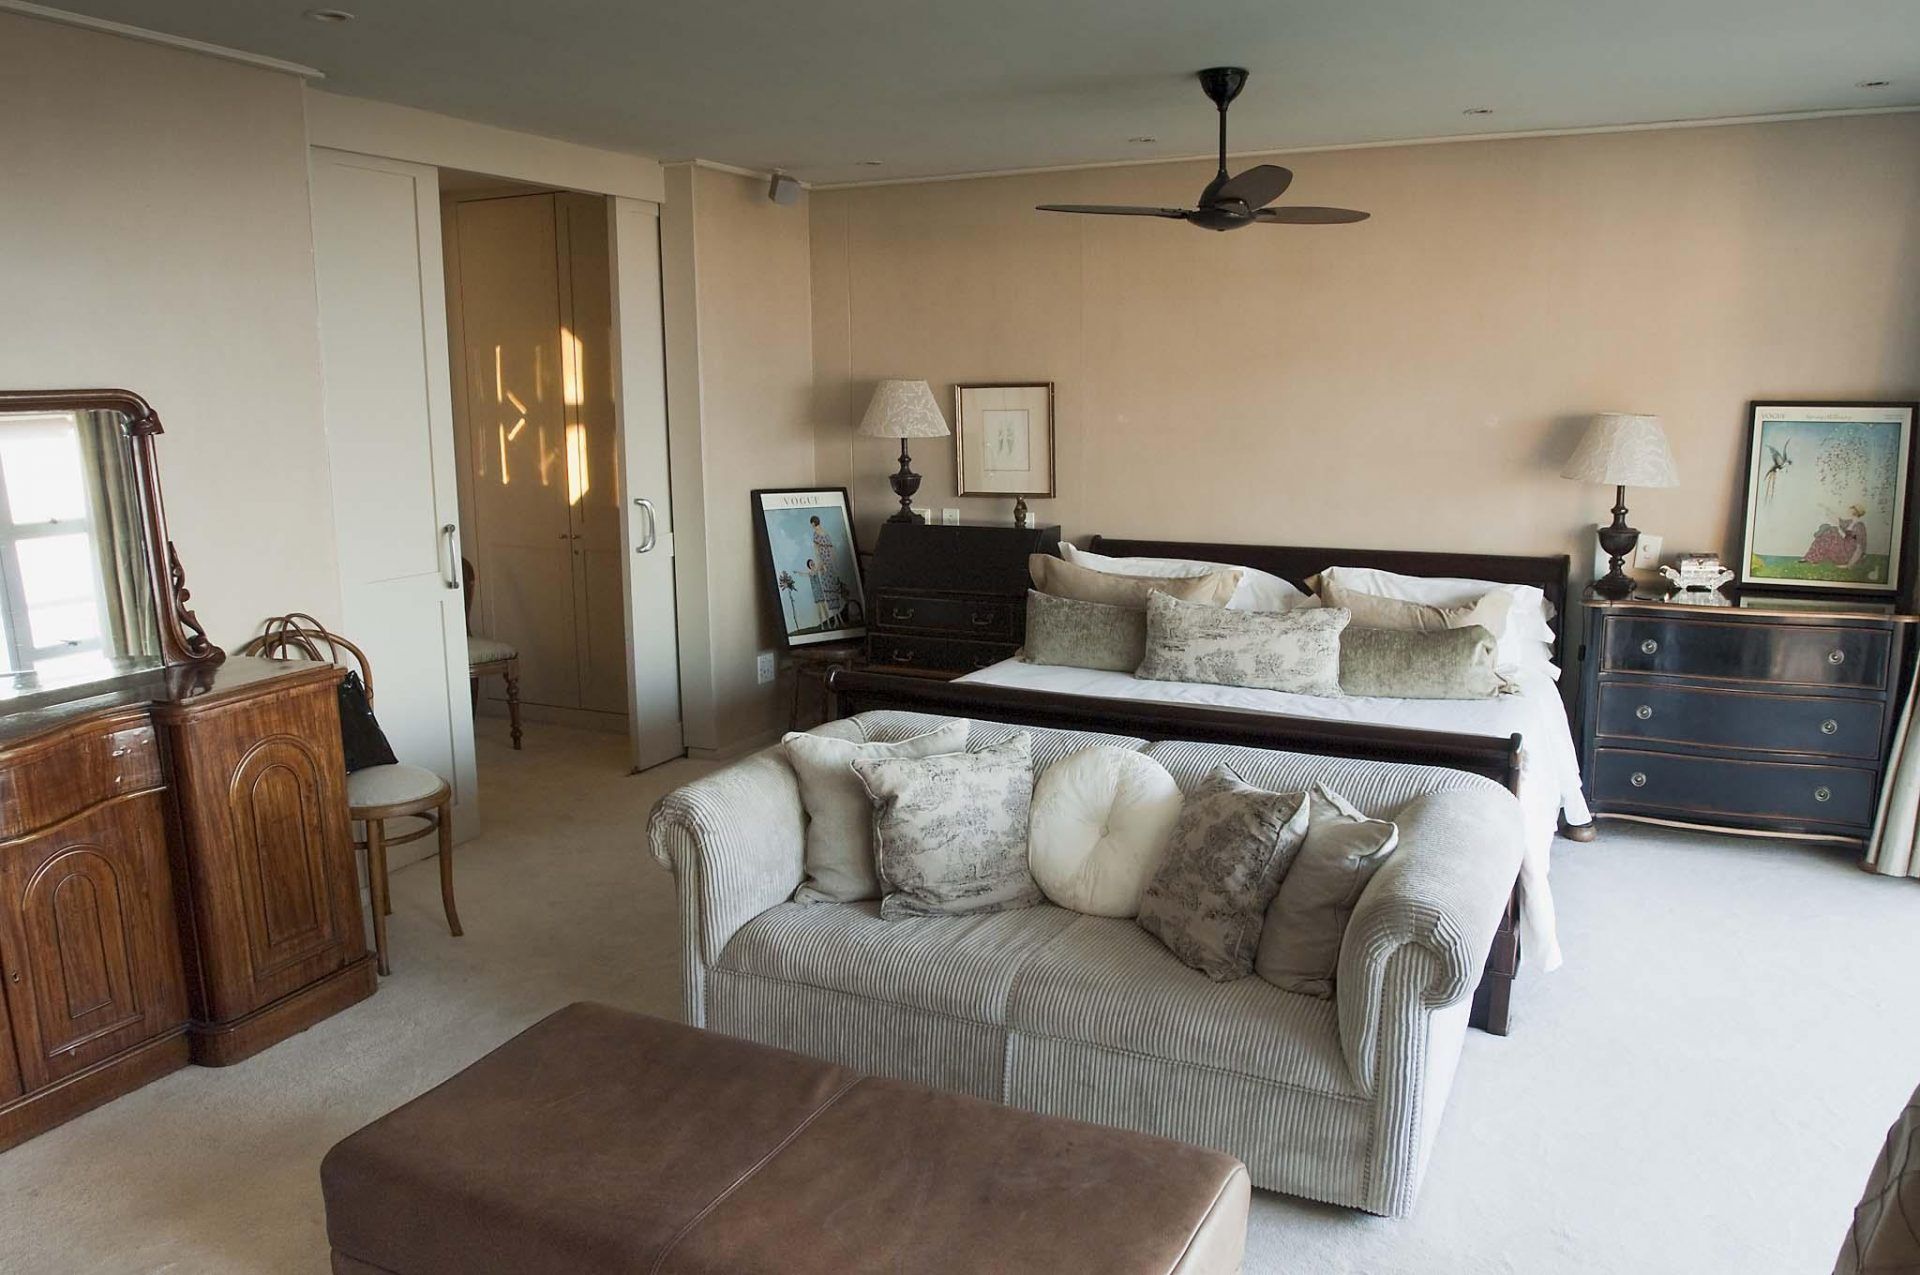 Photo 16 of Villa Marina accommodation in Bantry Bay, Cape Town with 4 bedrooms and 4 bathrooms